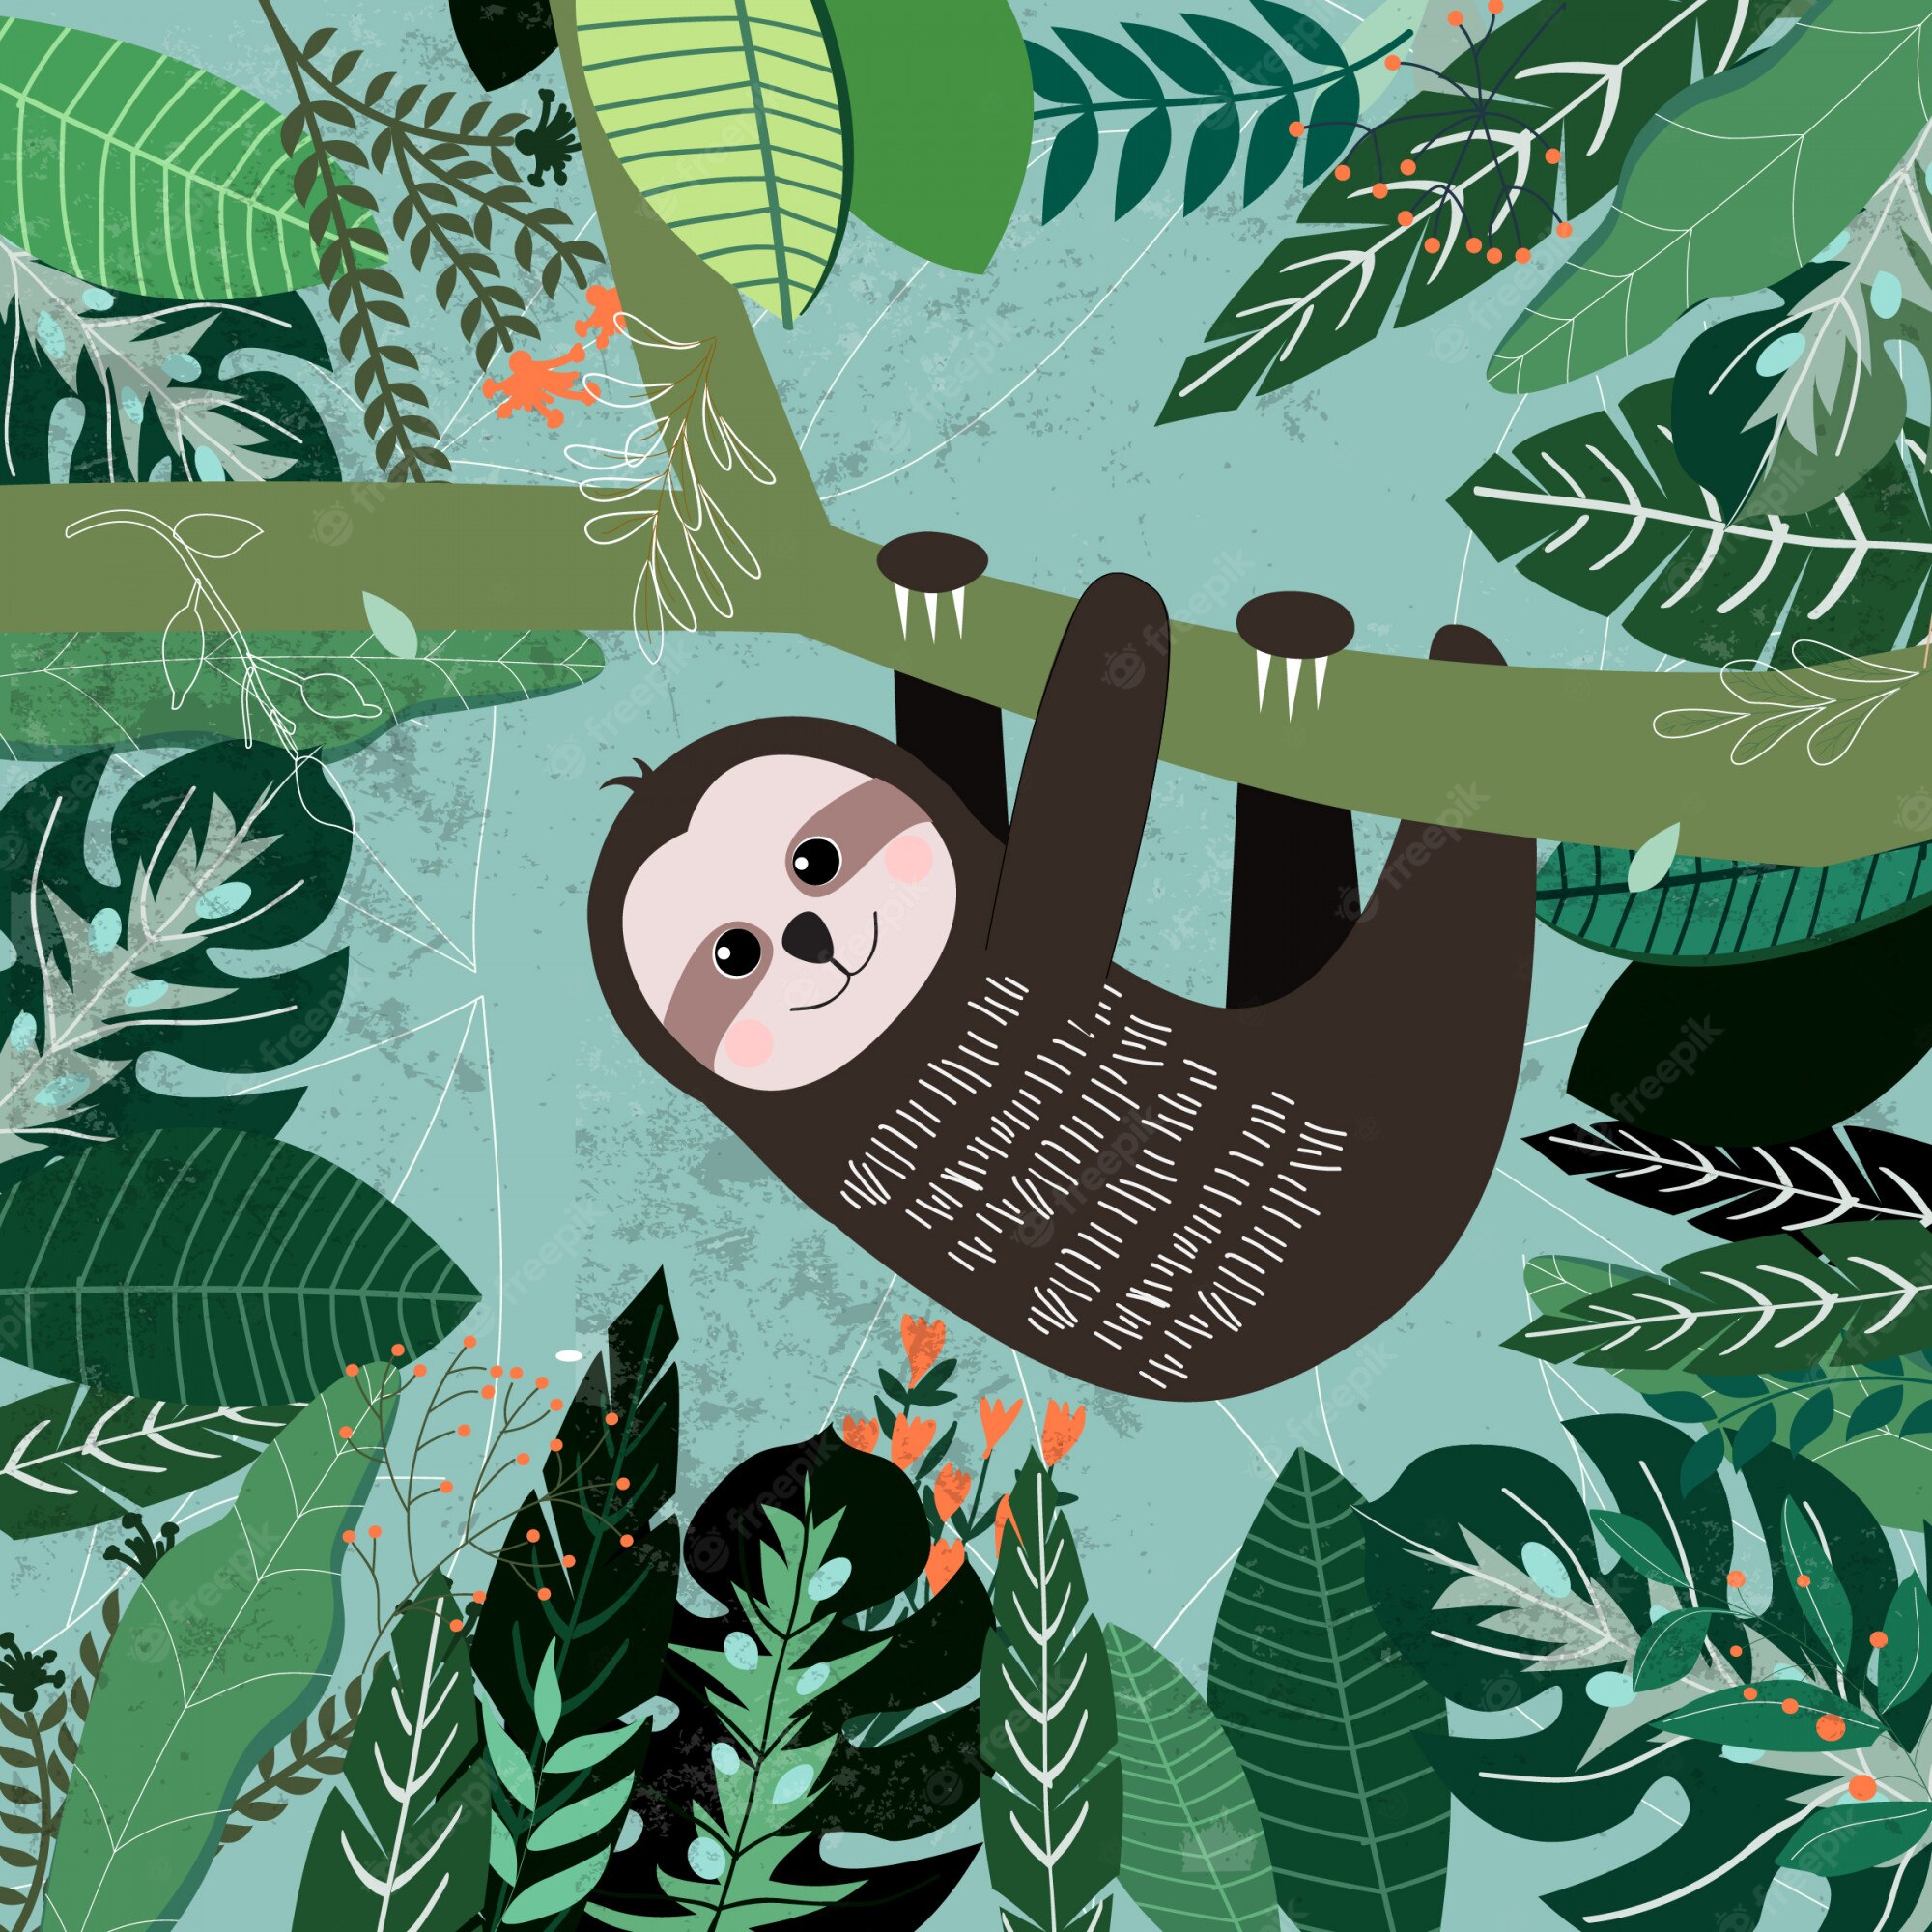 Sloth background Image. Free Vectors, & PSD